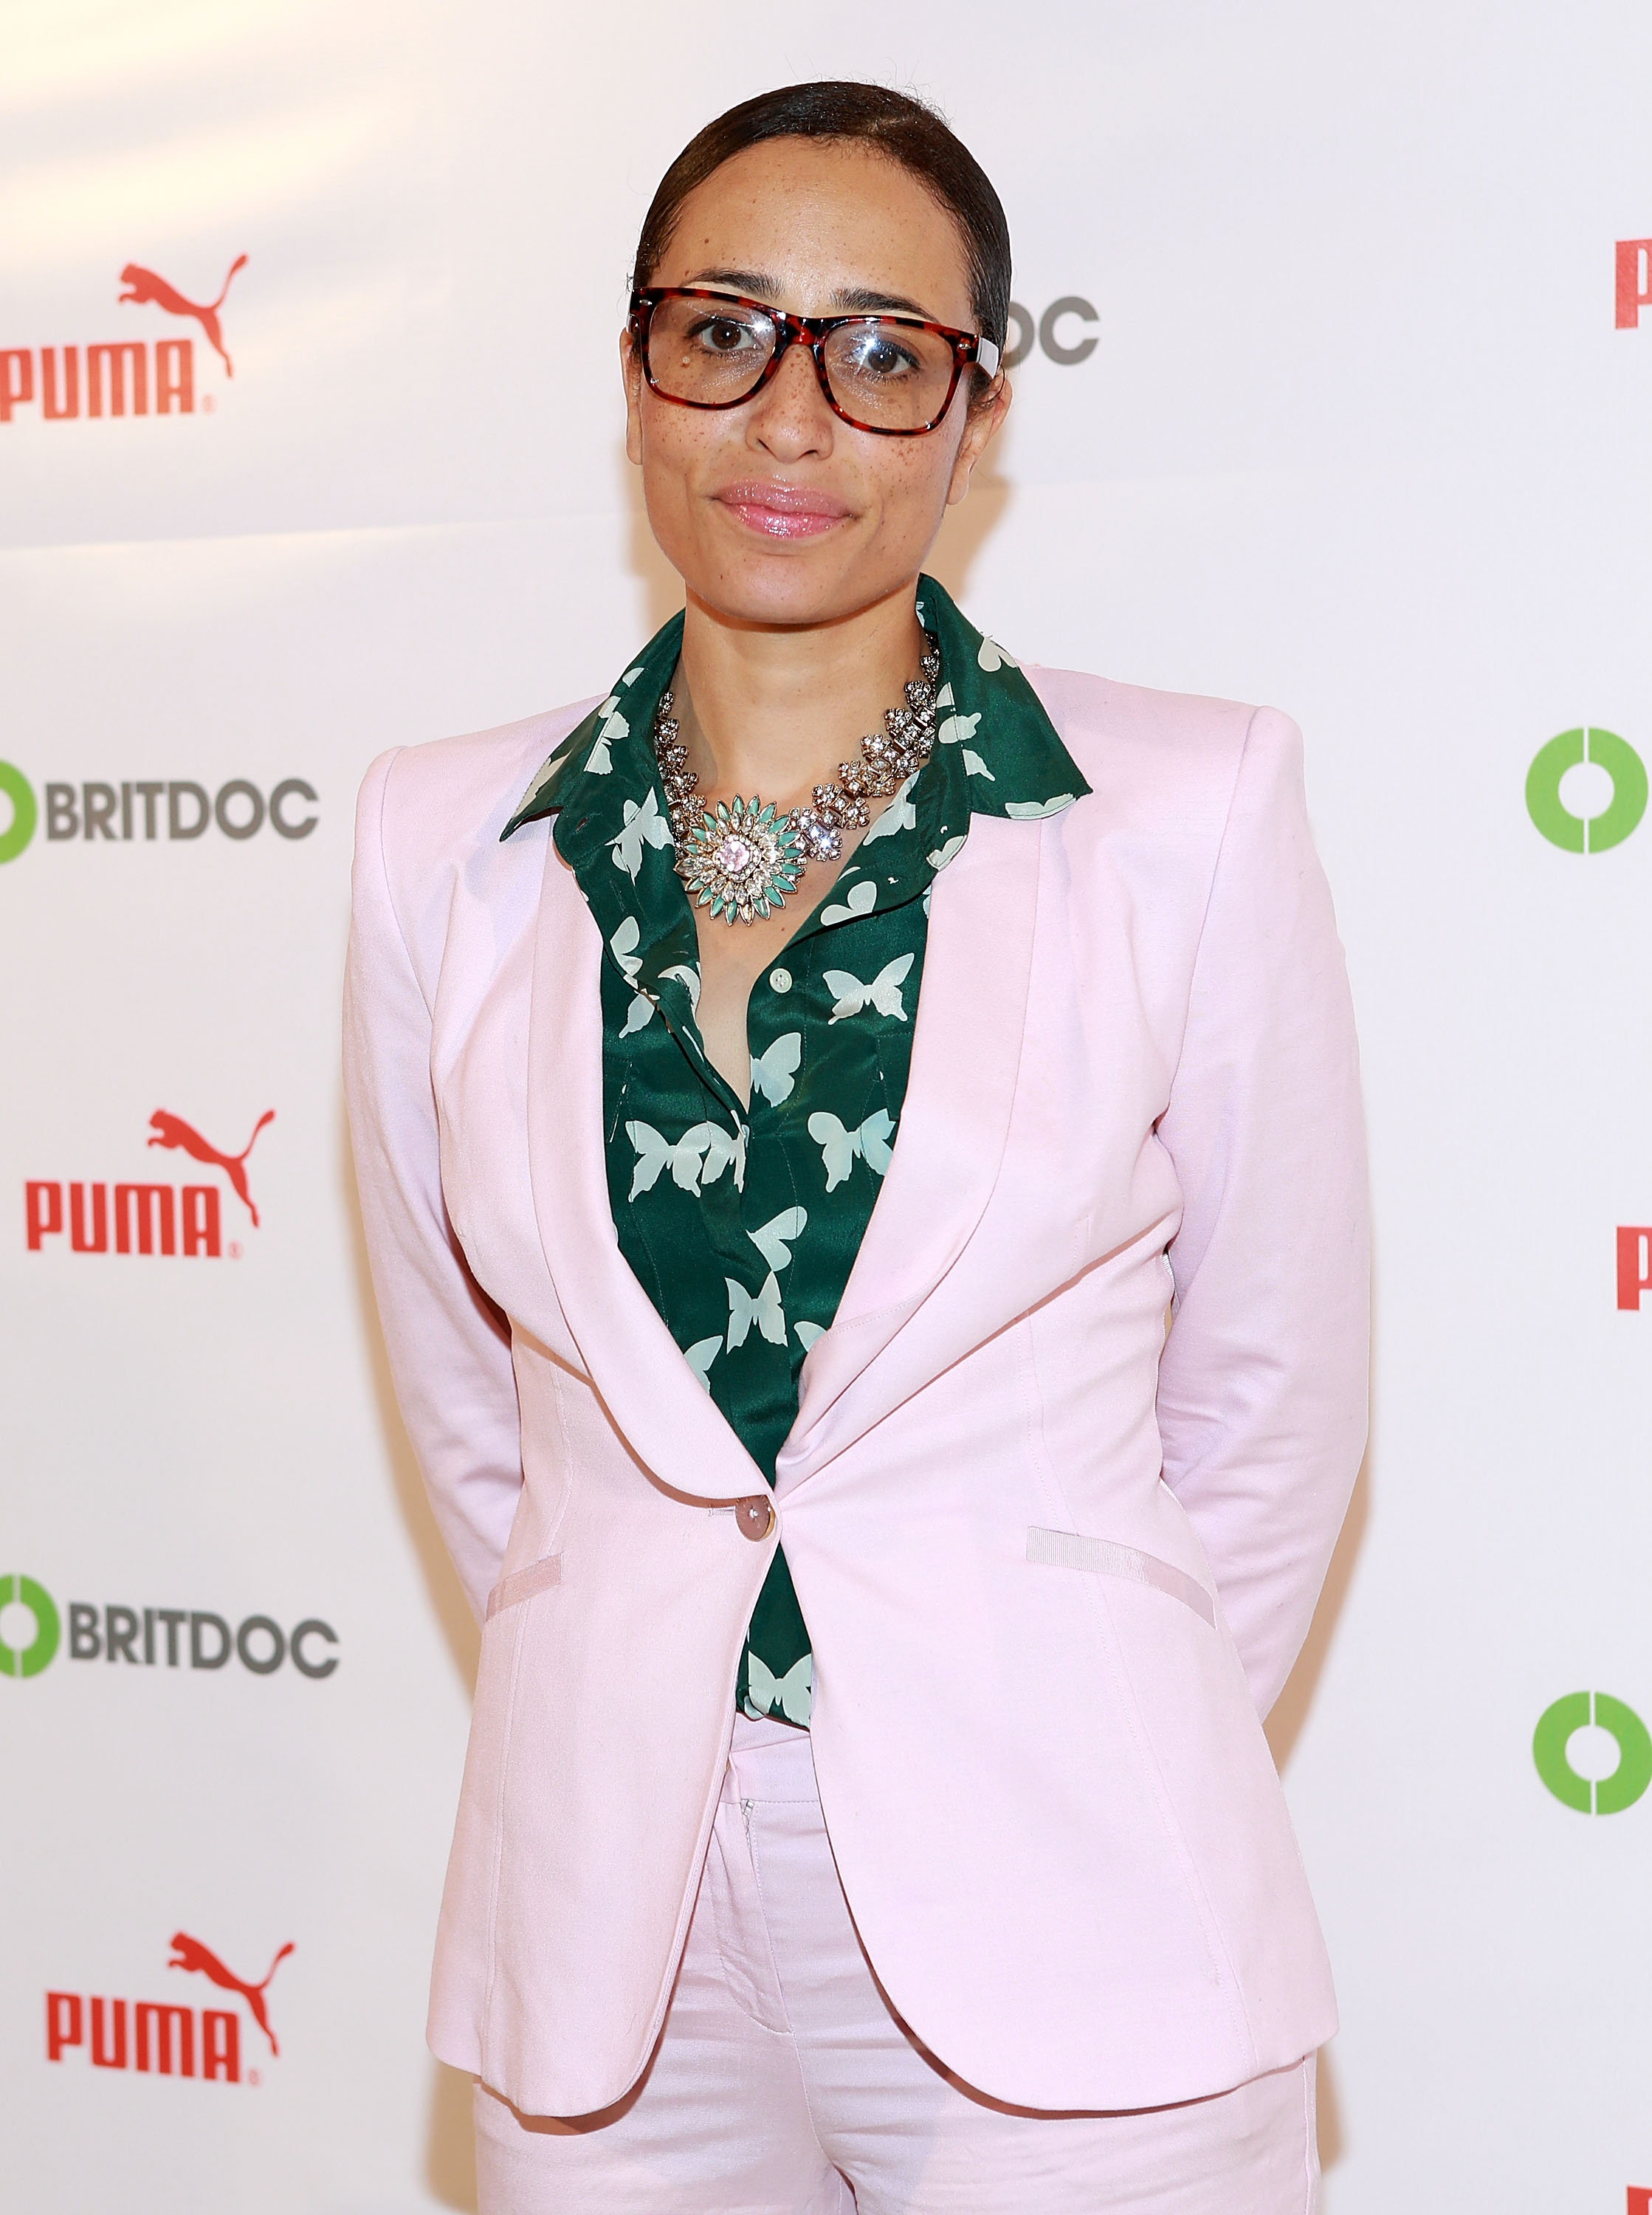 Zadie Smith at Times Center on November 13, 2013 in New York City. (Robin Marchan—Getty Images)